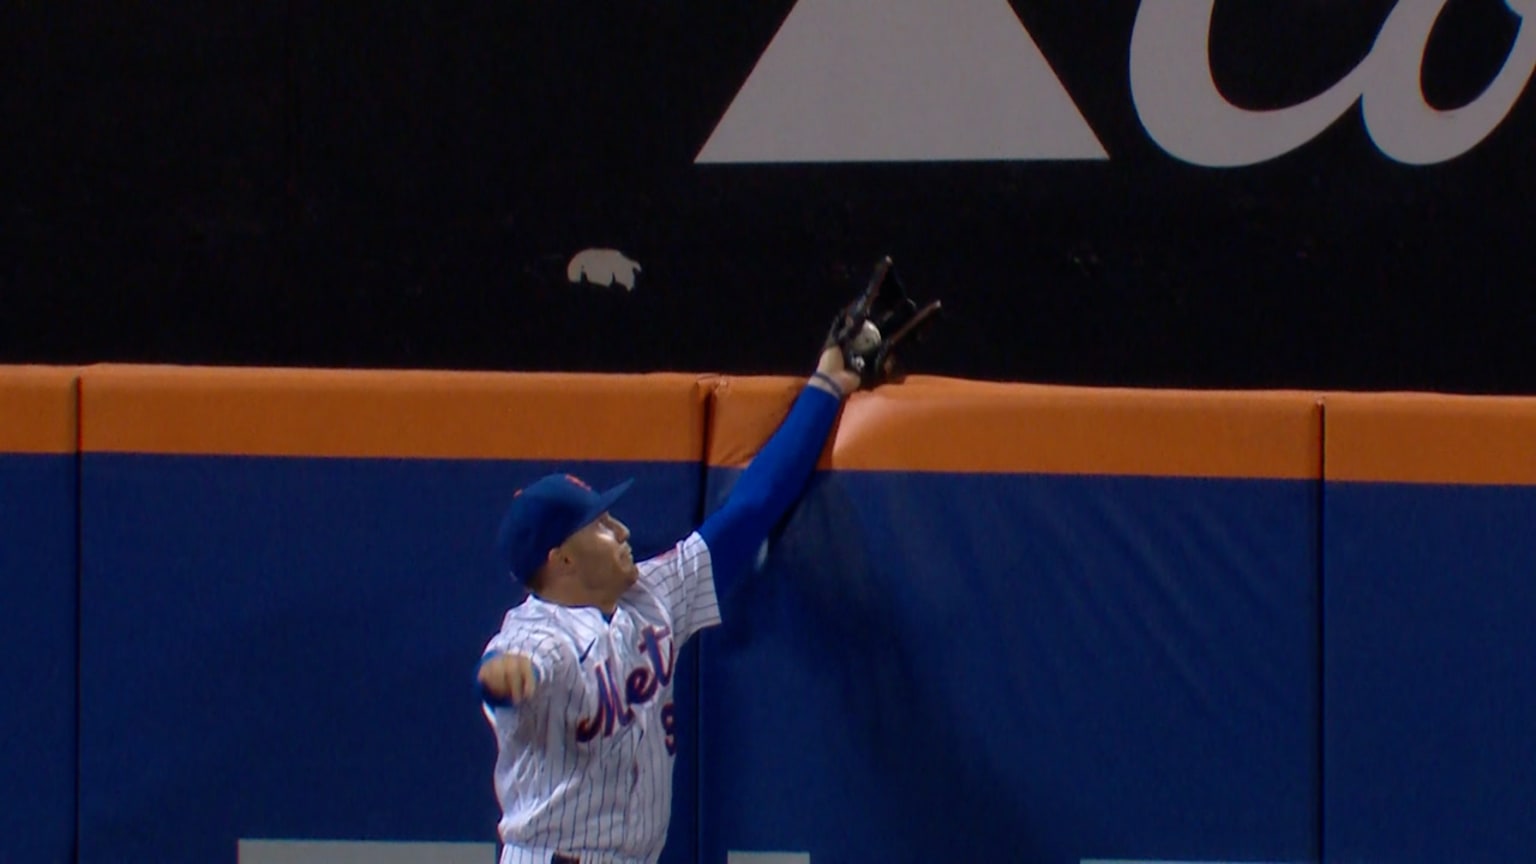 Brandon Nimmo with the catch of the year to rob Justin Turner of a